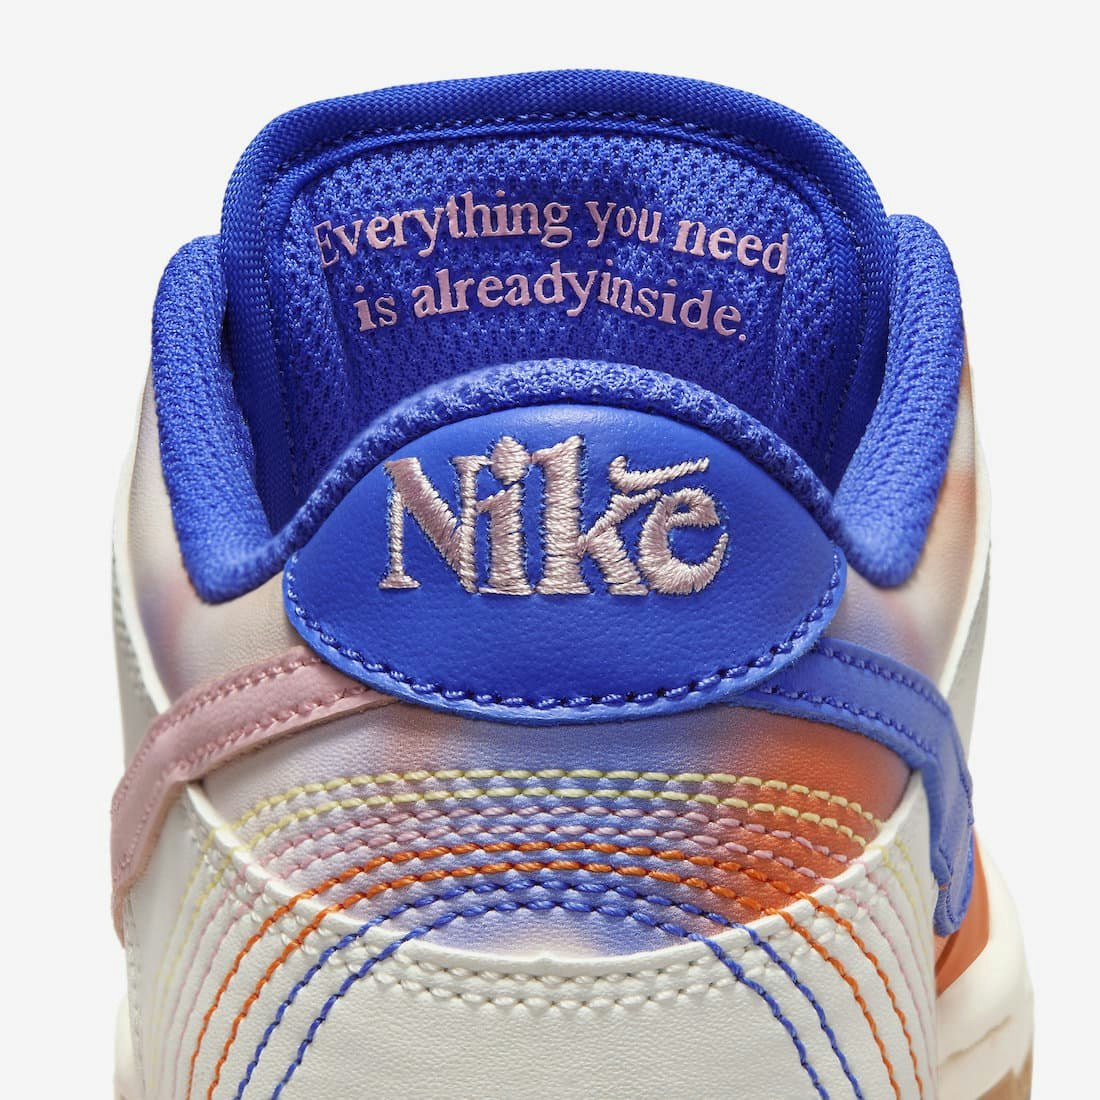 Nike Dunk Low "Everything you need"